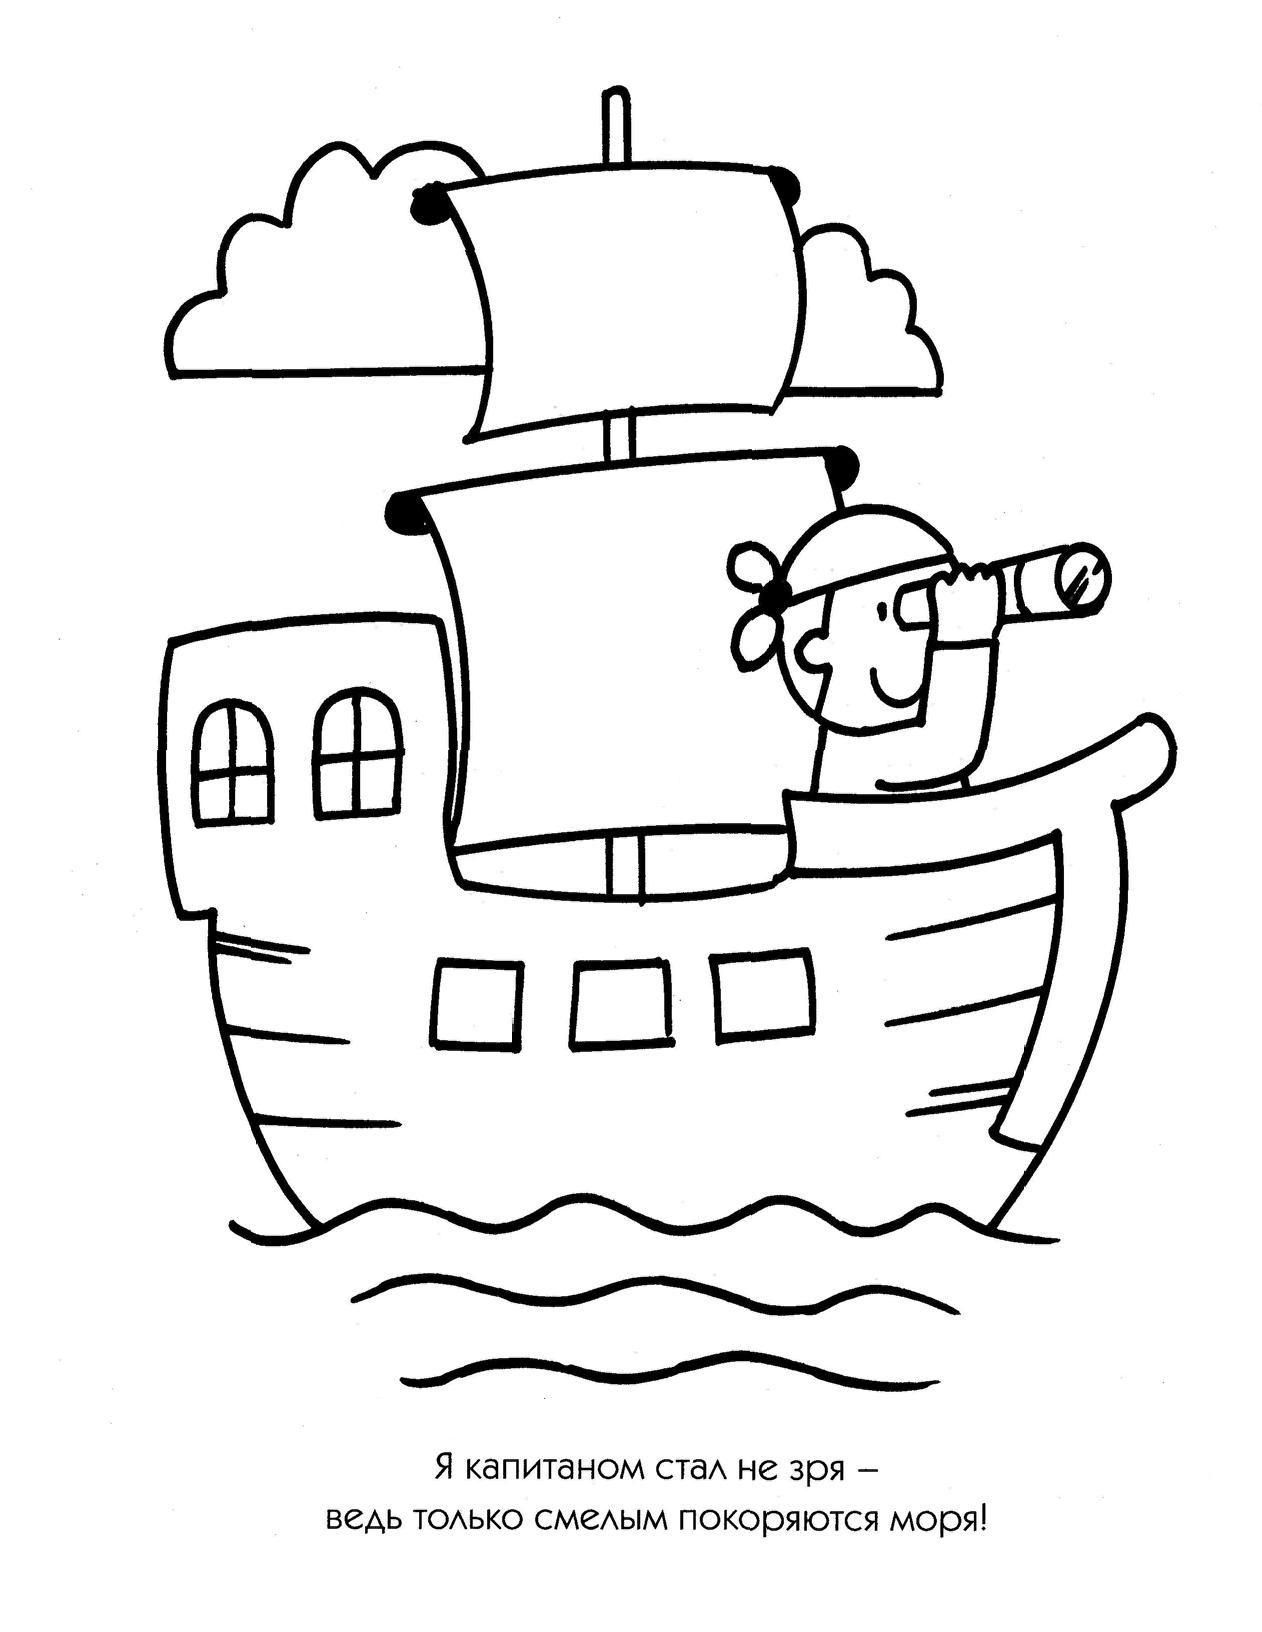 Creative boat coloring for 6-7 year olds